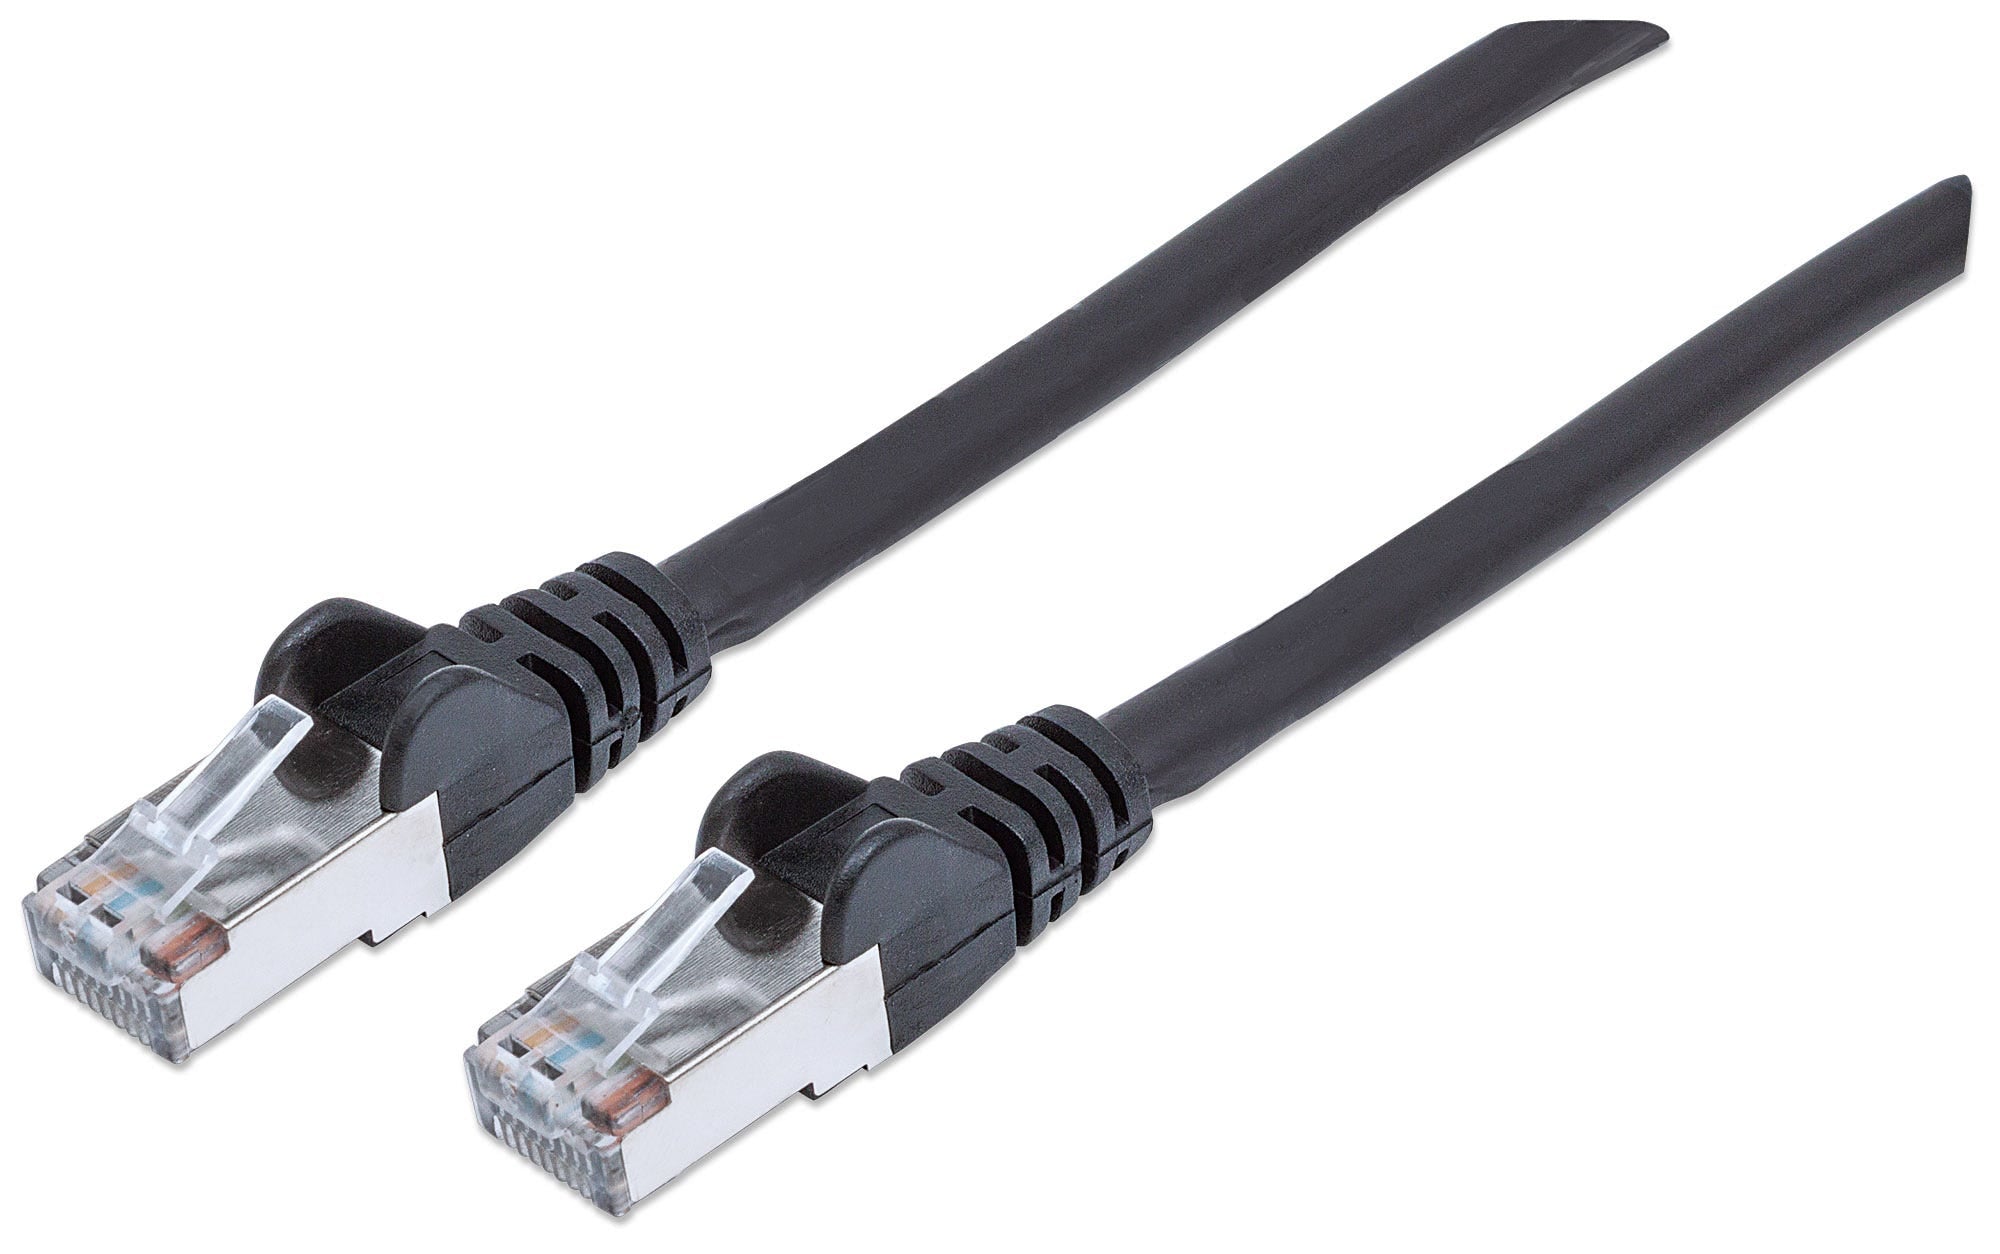 Intellinet Network Patch Cable, Cat6, 0.5m, Black, Copper, S/FTP, LSOH / LSZH, PVC, RJ45, Gold Plated Contacts, Snagless, Booted, Lifetime Warranty, Polybag